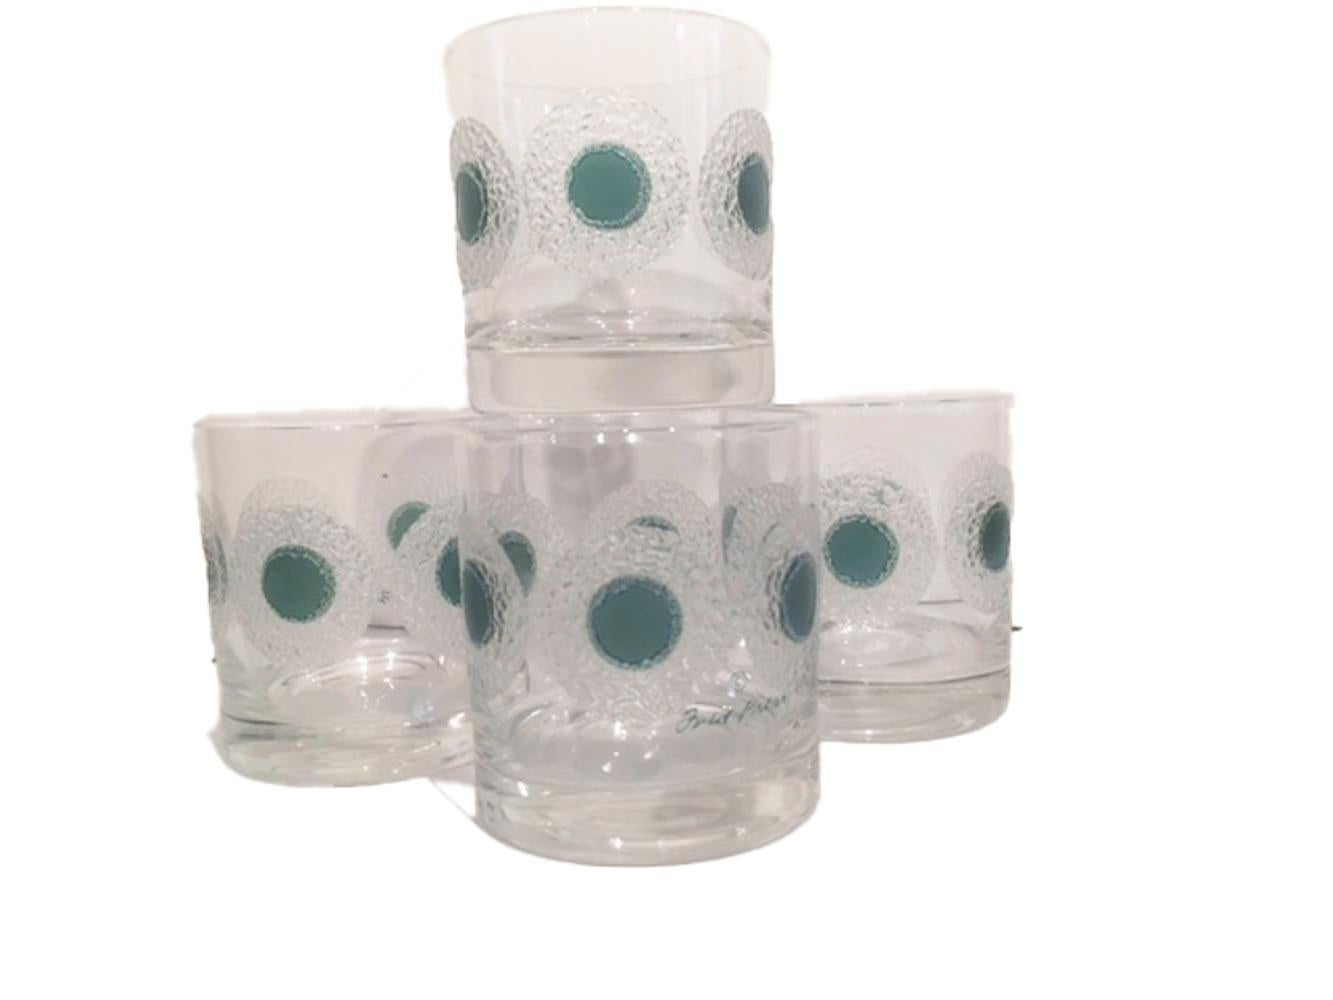 Rare Fred Press signed rocks glasses with blue/green translucent enamel dots within a ring of raised textured clear enamel.